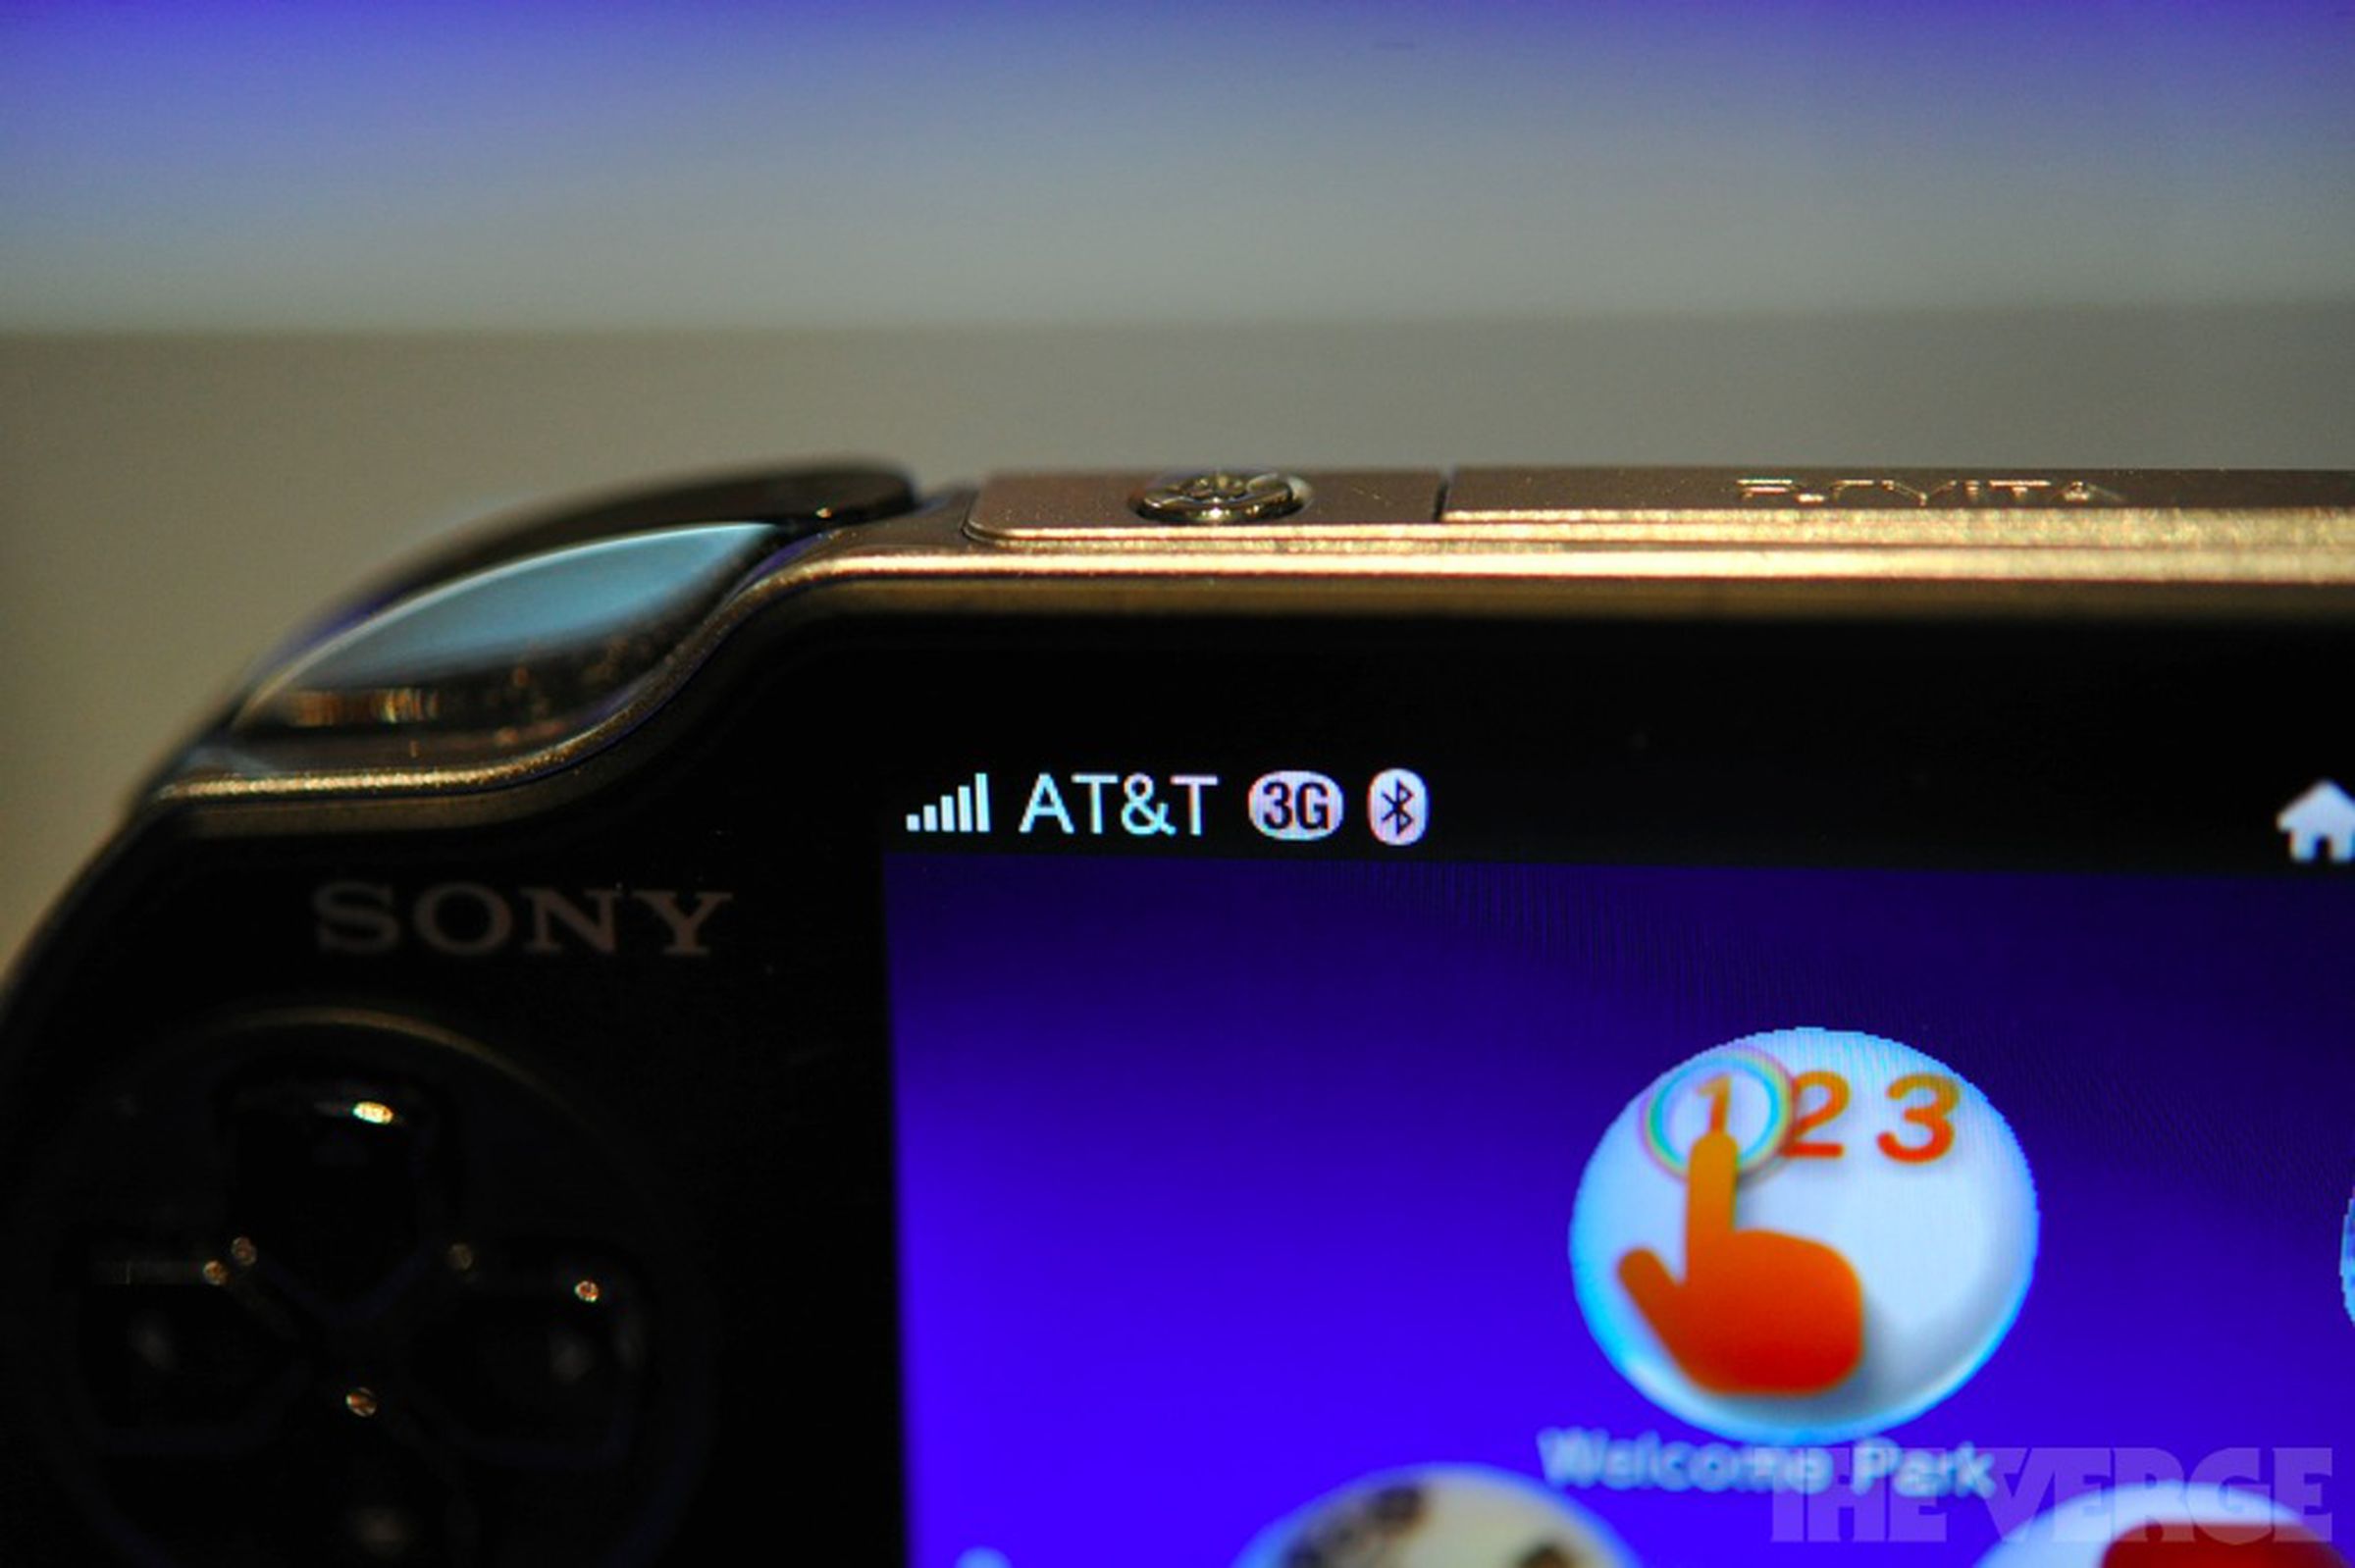 A PS Vita’s display showing that it’s connected via 3G to AT&amp;T’s service in 2012